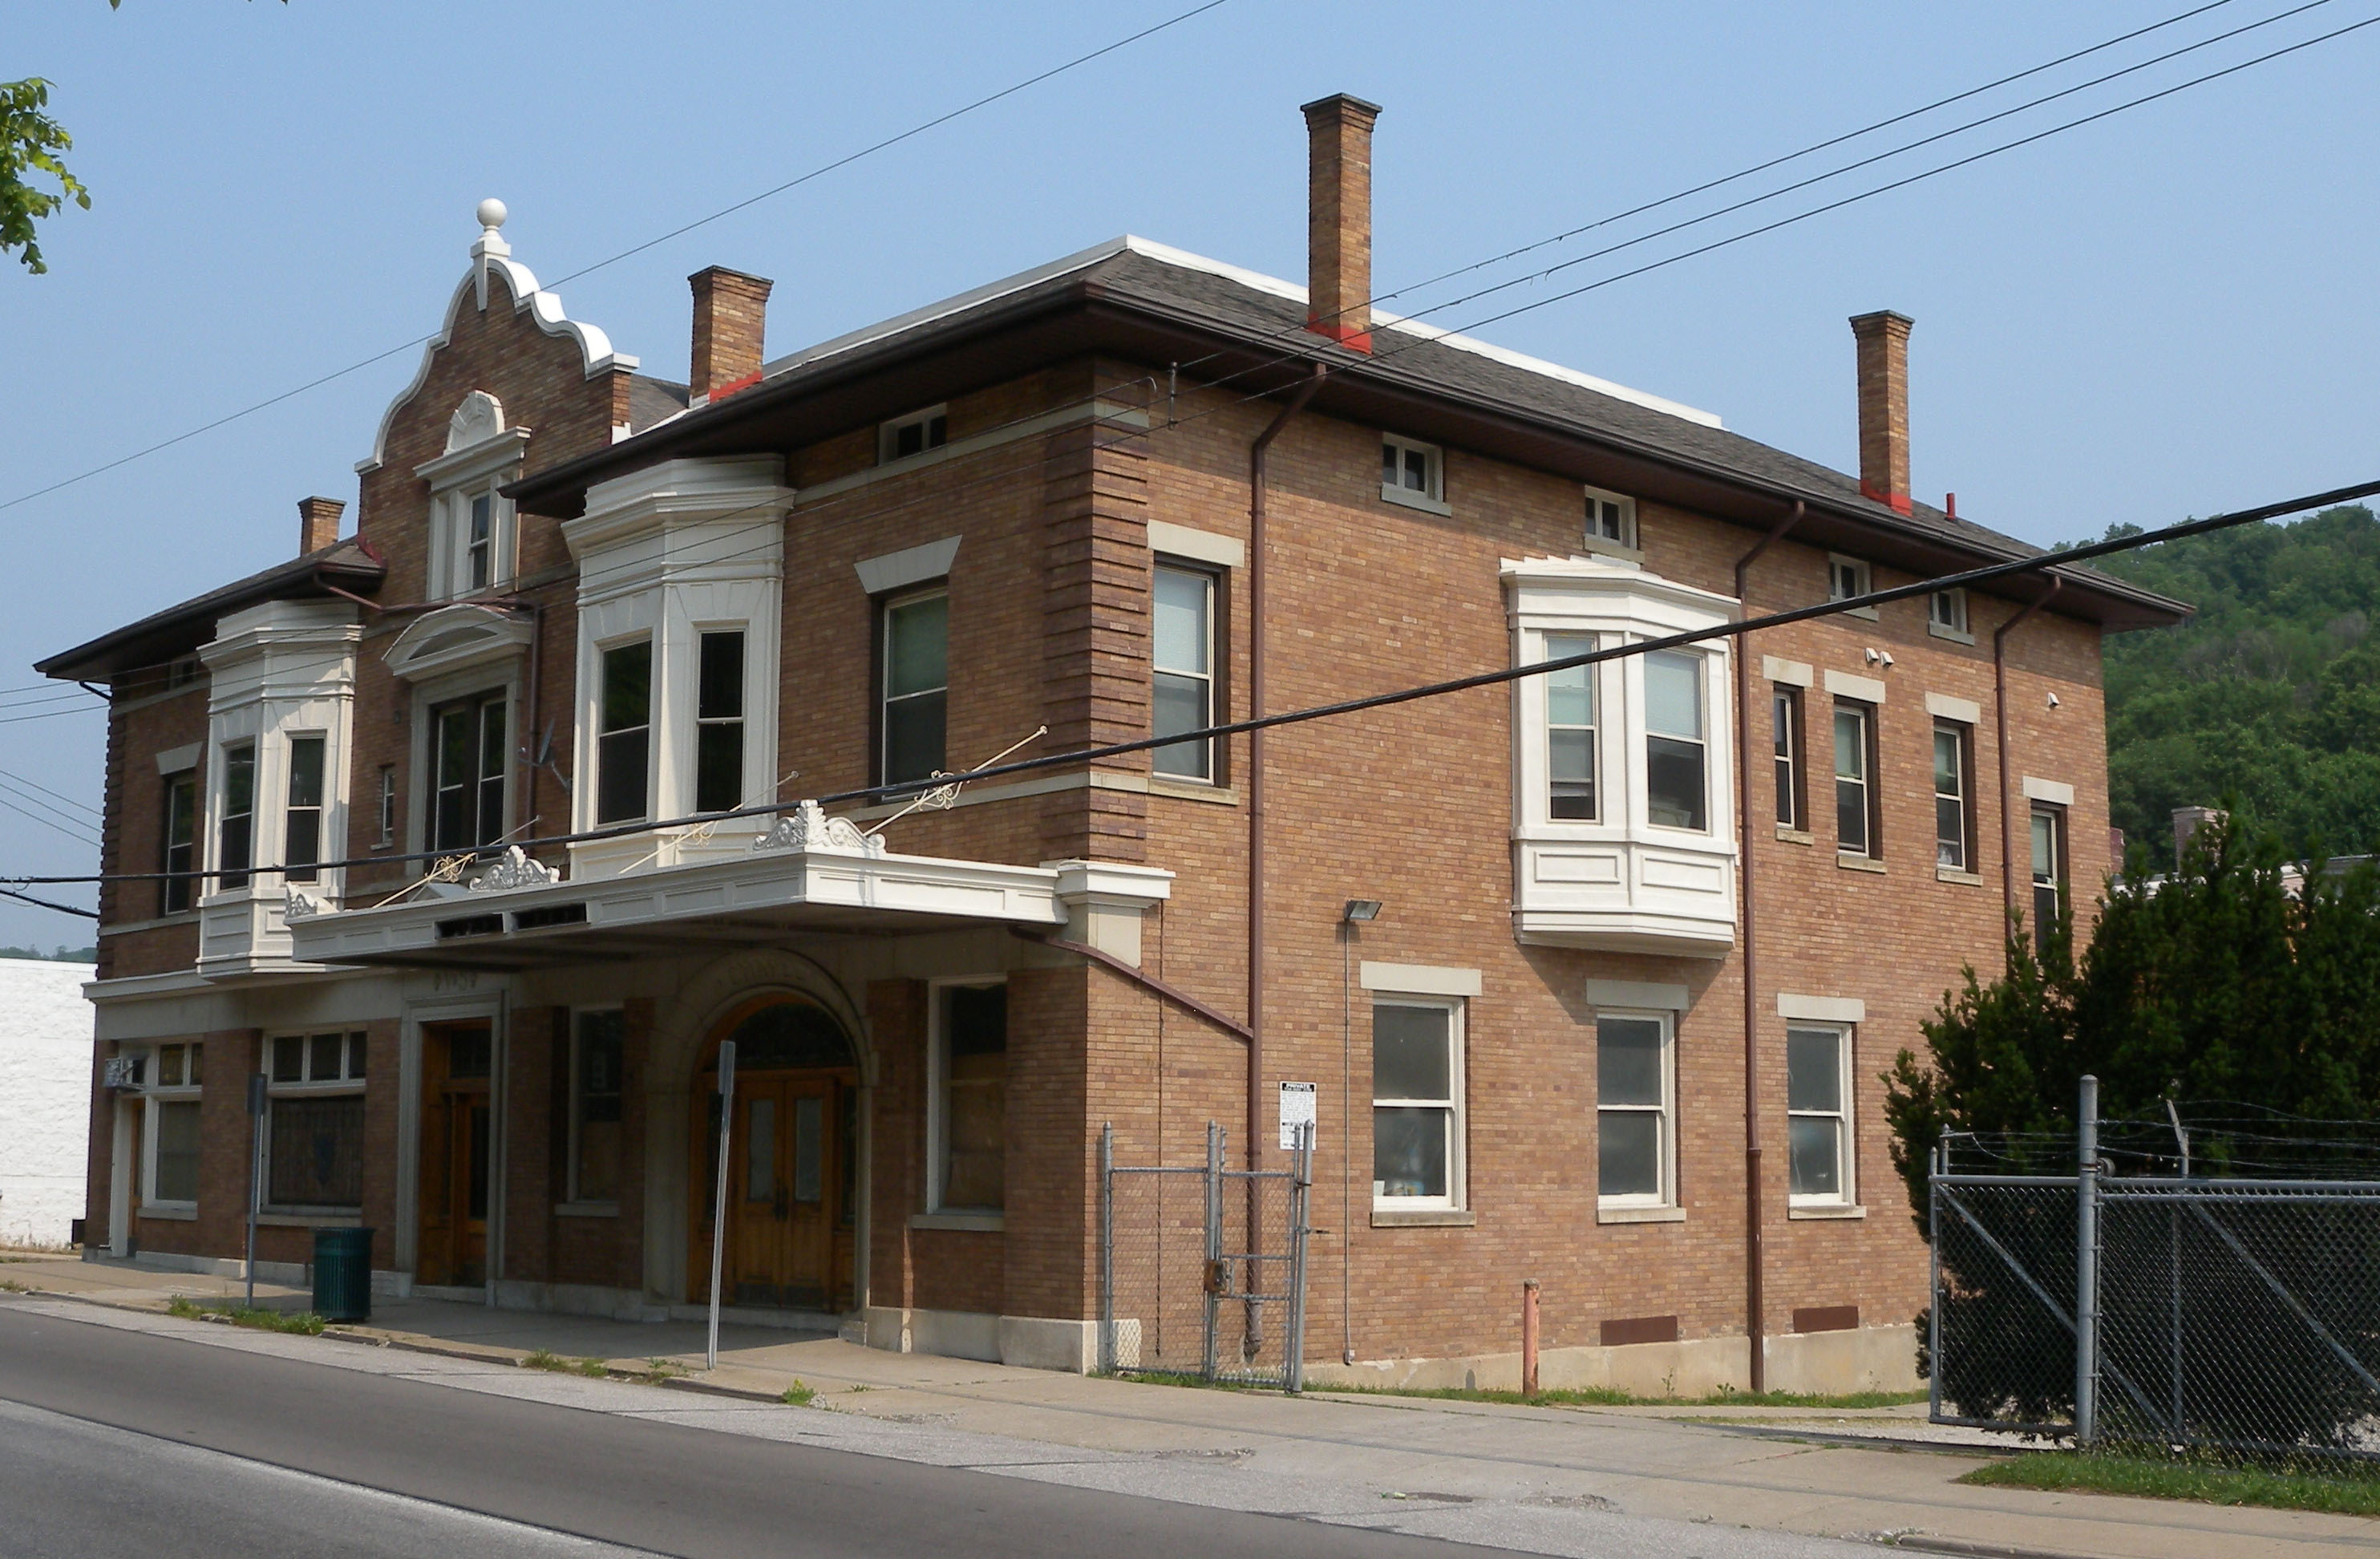 Example of Mission style buildling (former Vitt & Stermer funeral home) that once stood on Westwood Avenue